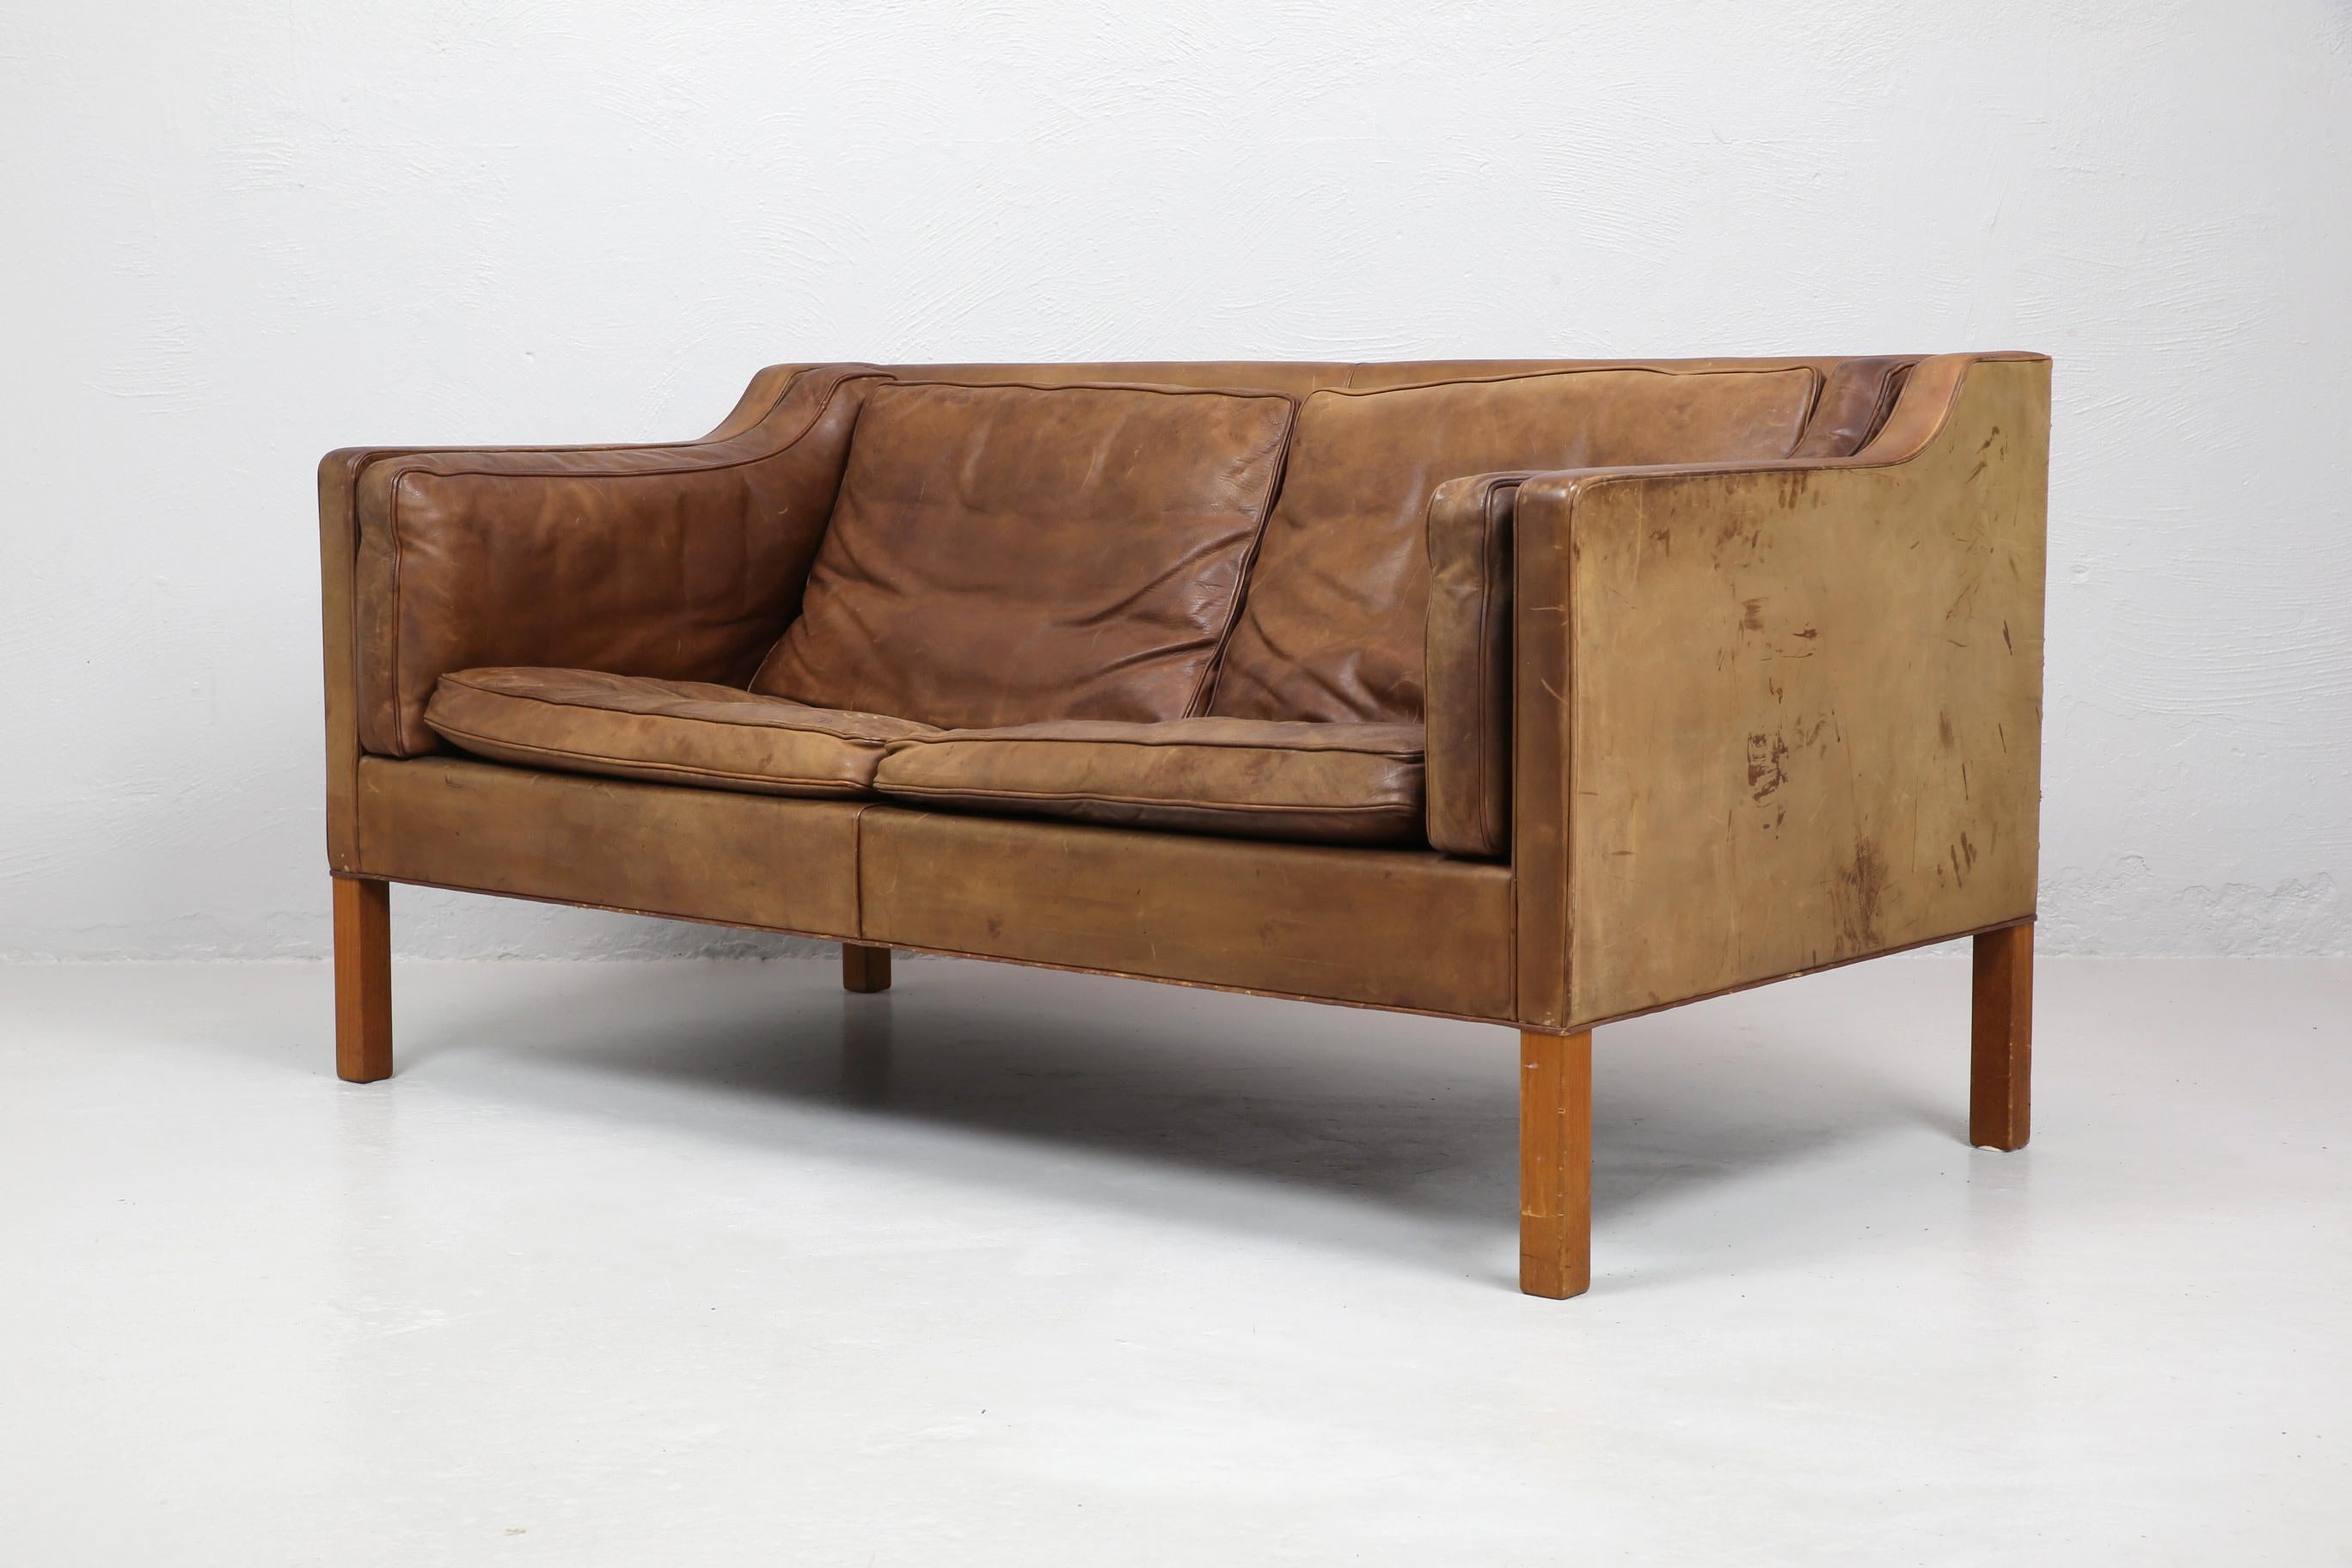 Original two-seat model 2212 sofa designed by Borge Mogensen in 1965 and made by Frederecia, Denmark. In original condition with a some wear, marks and patina to the leather. A pair are available.